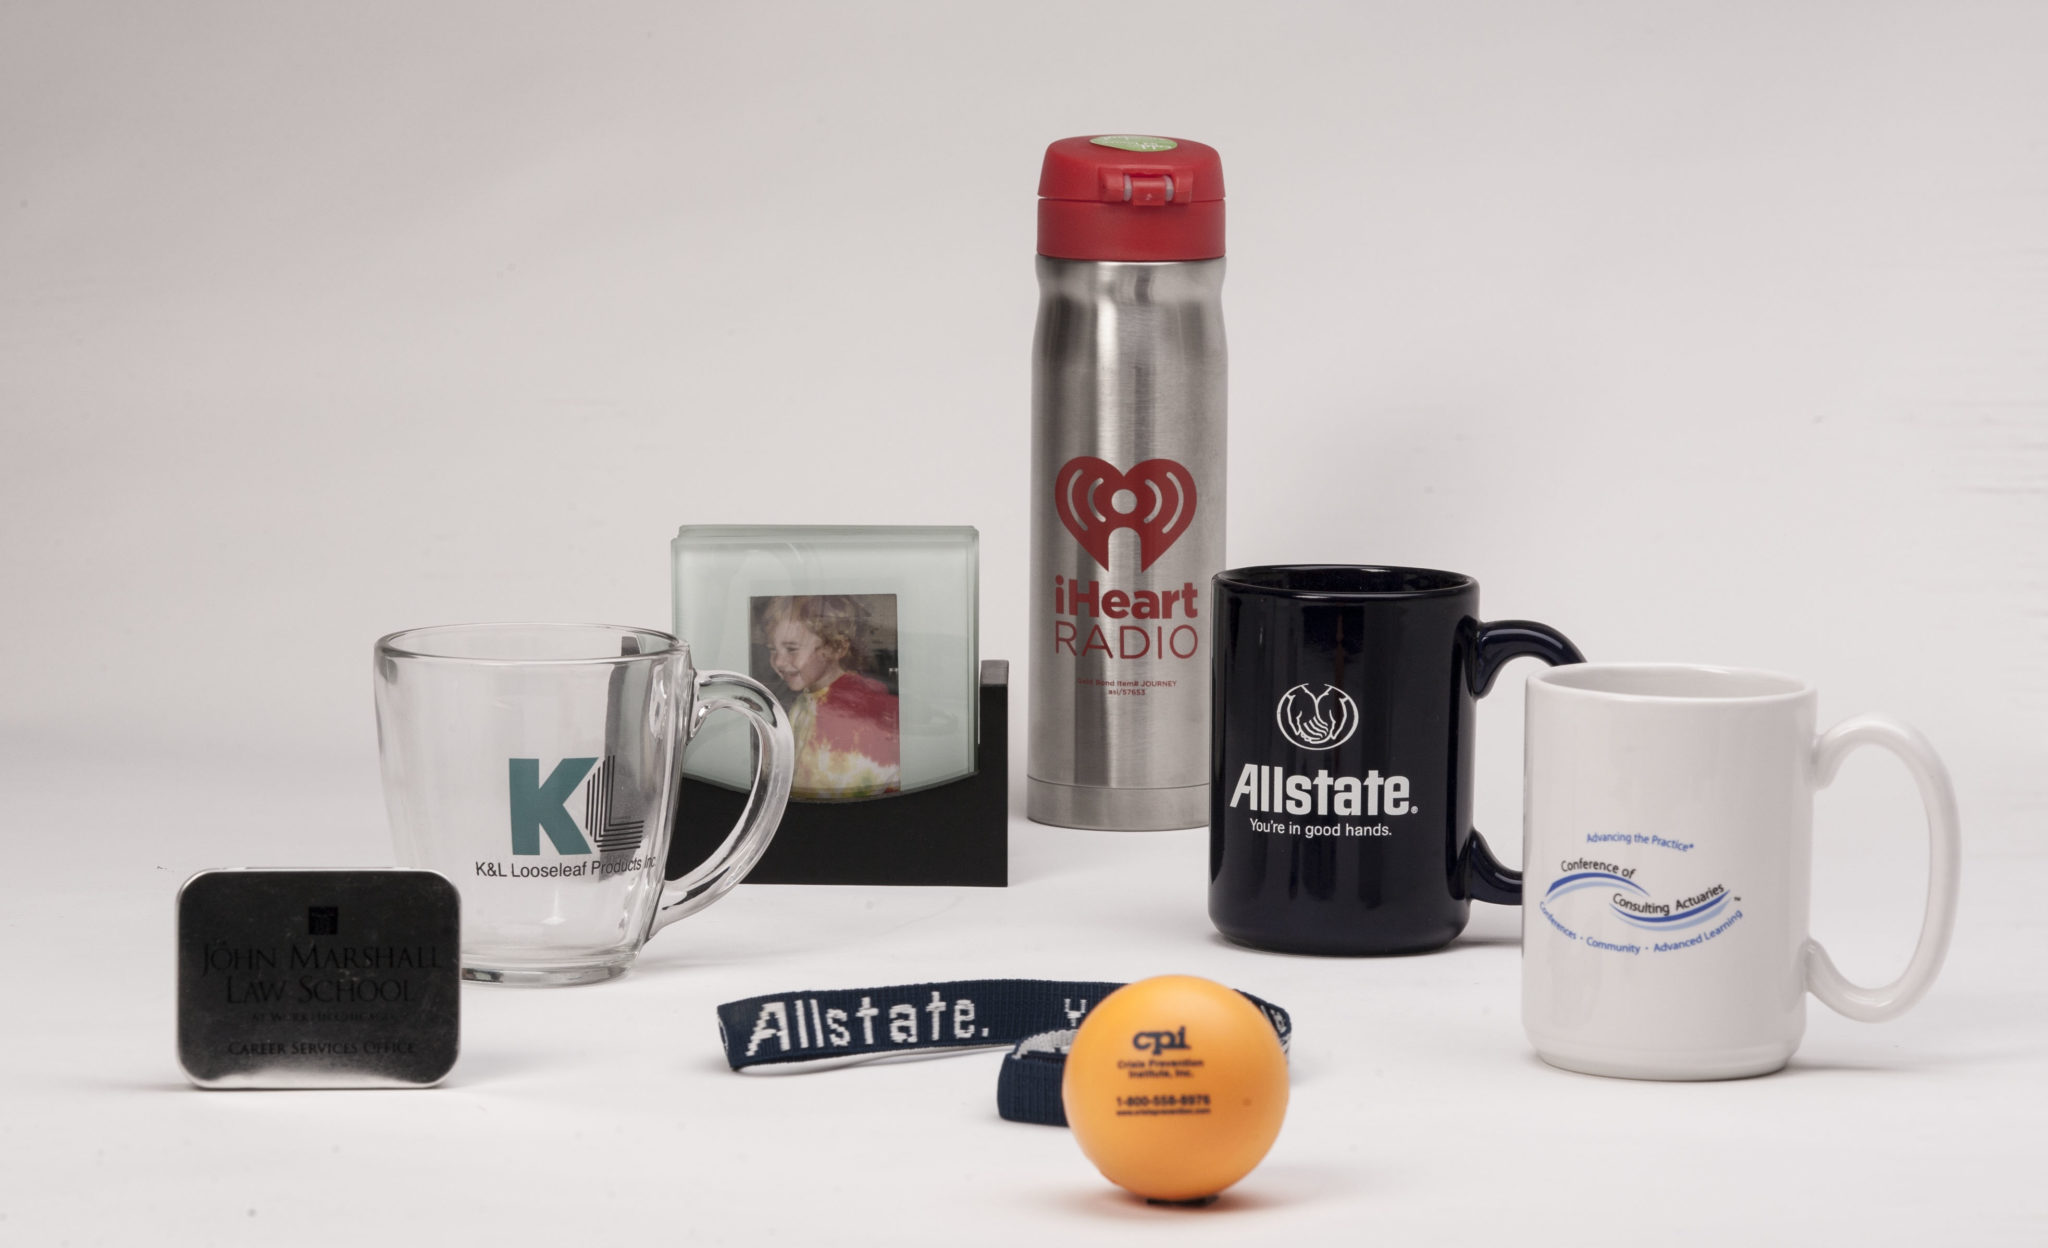 Custom Promotional Gifts